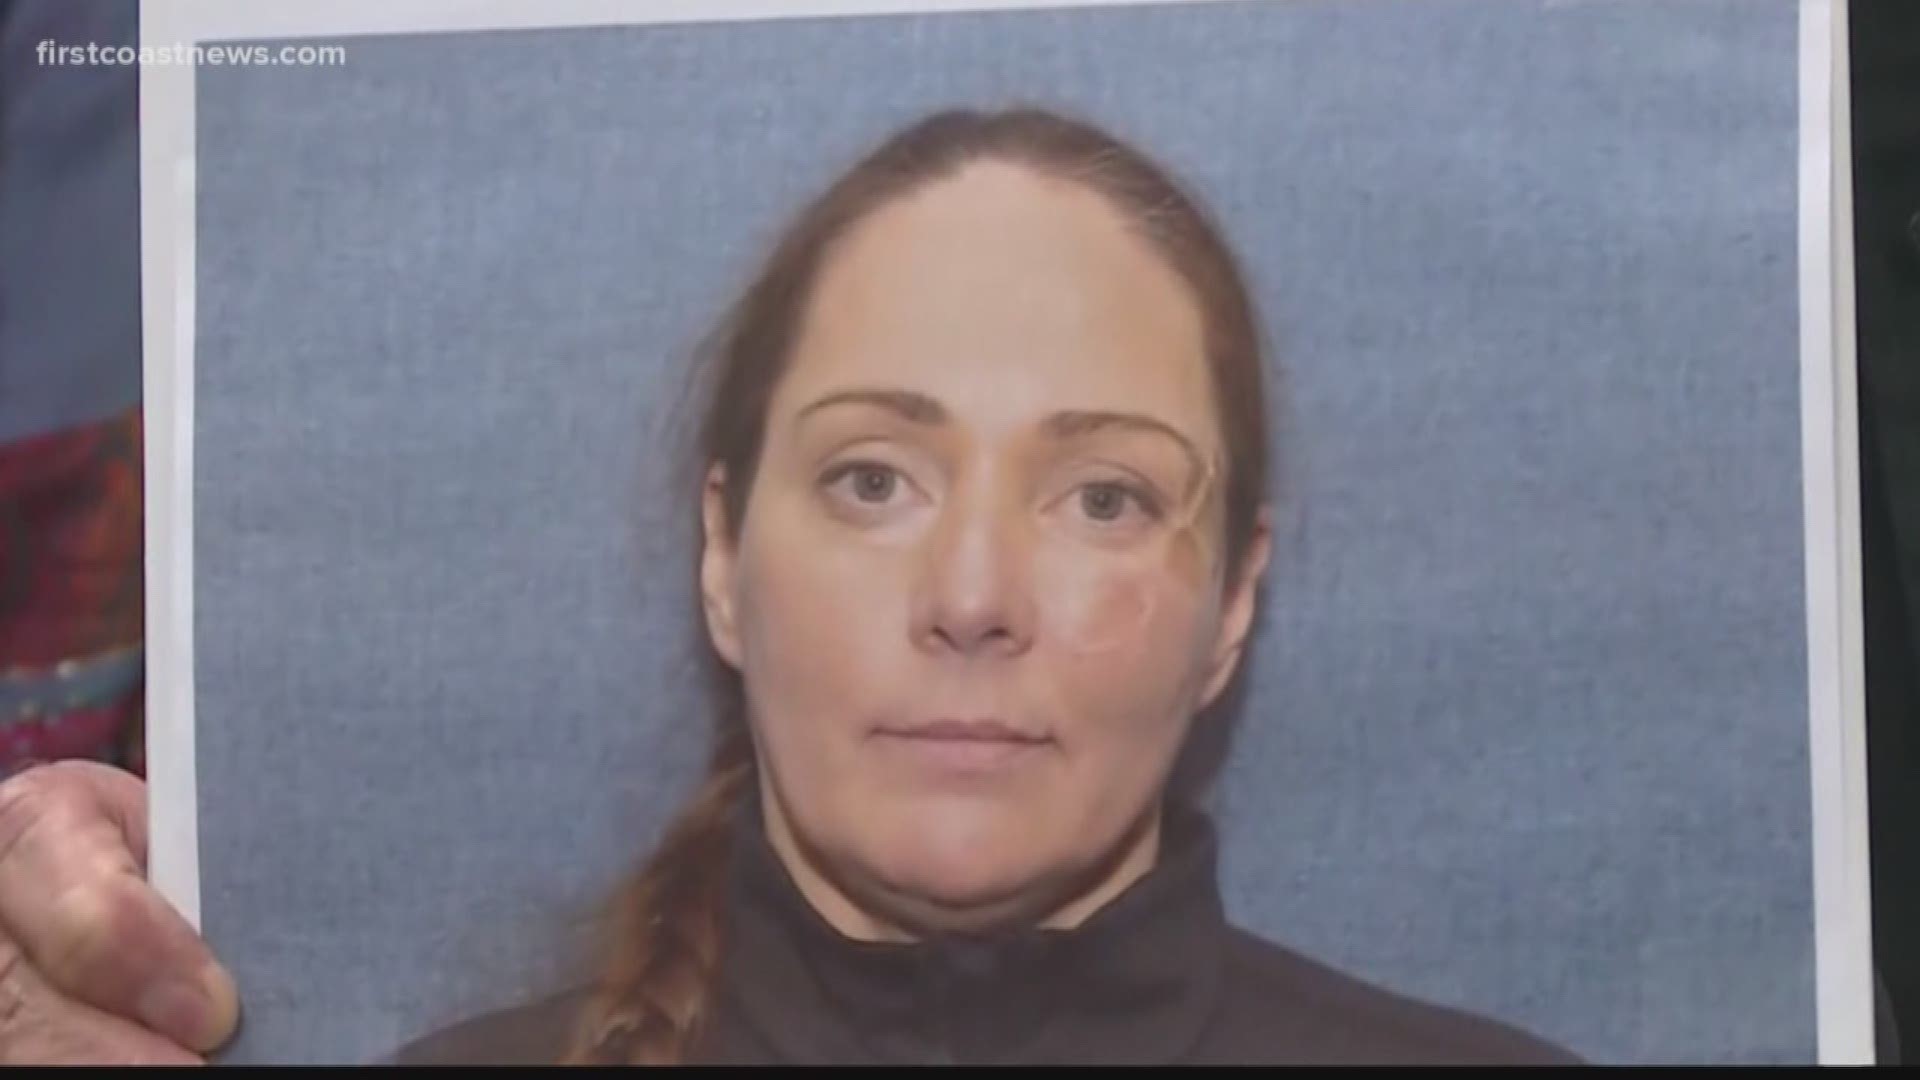 Kimberly Kessler declared competent to face court proceedings for the murder of Joleen Cummings, according to state psychologists who evaluated her.